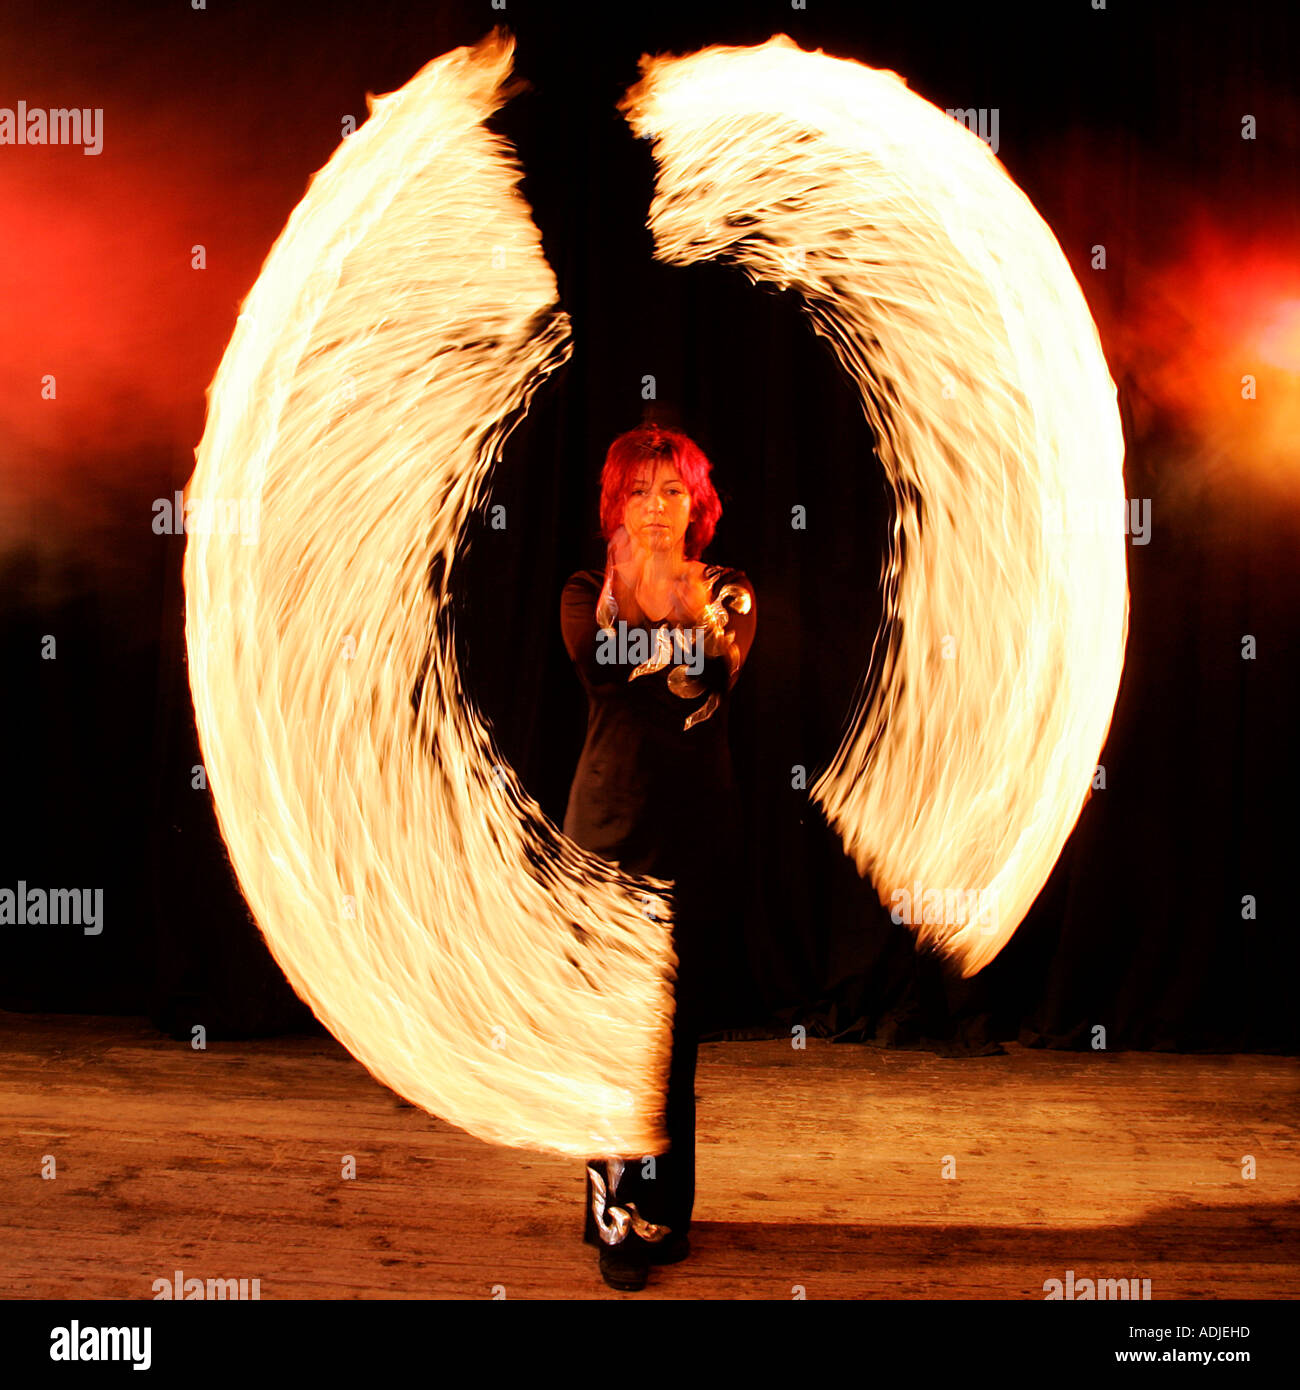 confusion danger ballerina ballet dancer actress stage performance challenge fire abstract modern absurd artistic balance Stock Photo